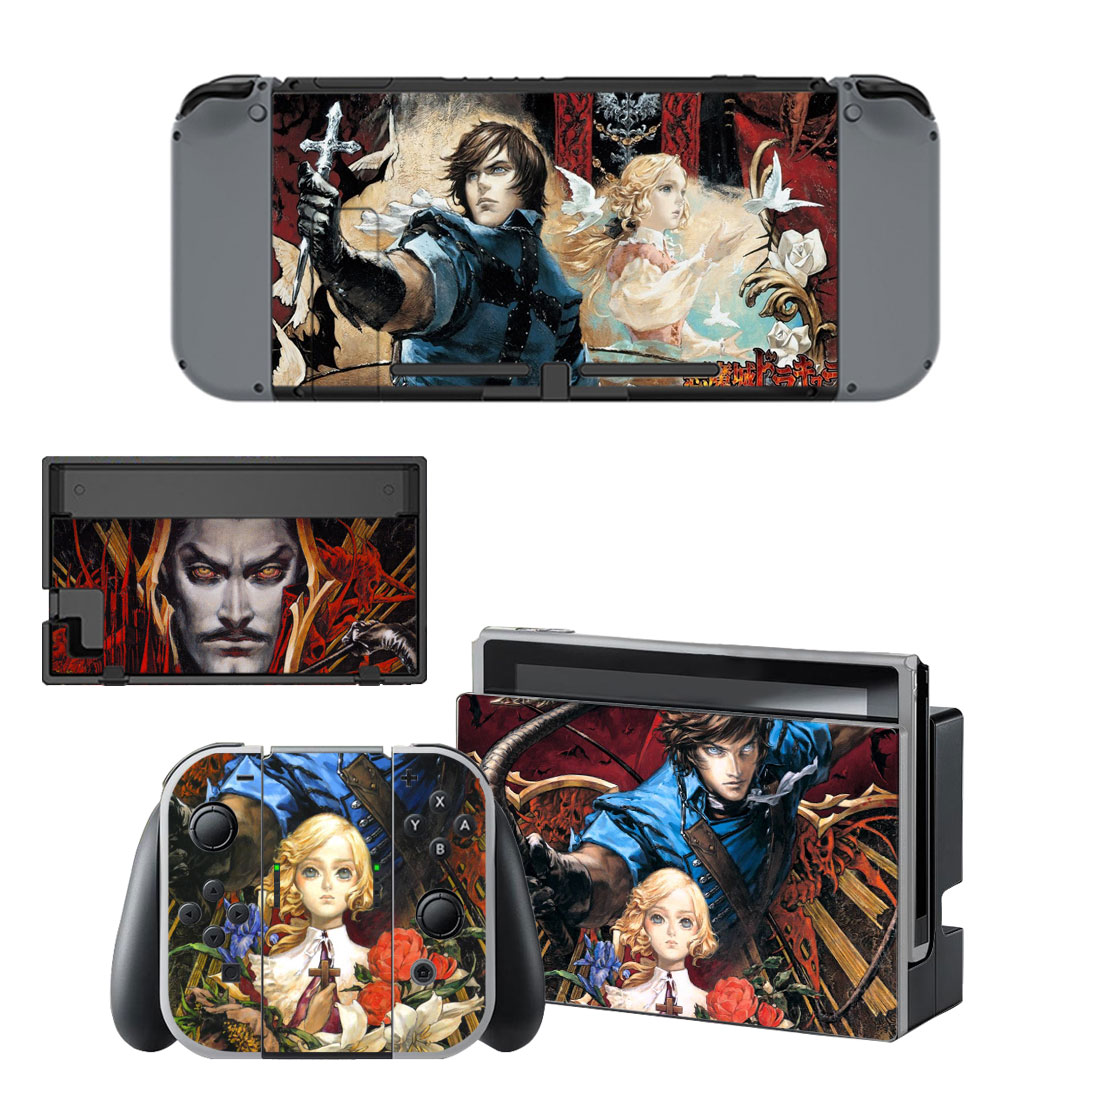 Castlevania The Dracula X Chronicles Skin Sticker For Nintendo Switch